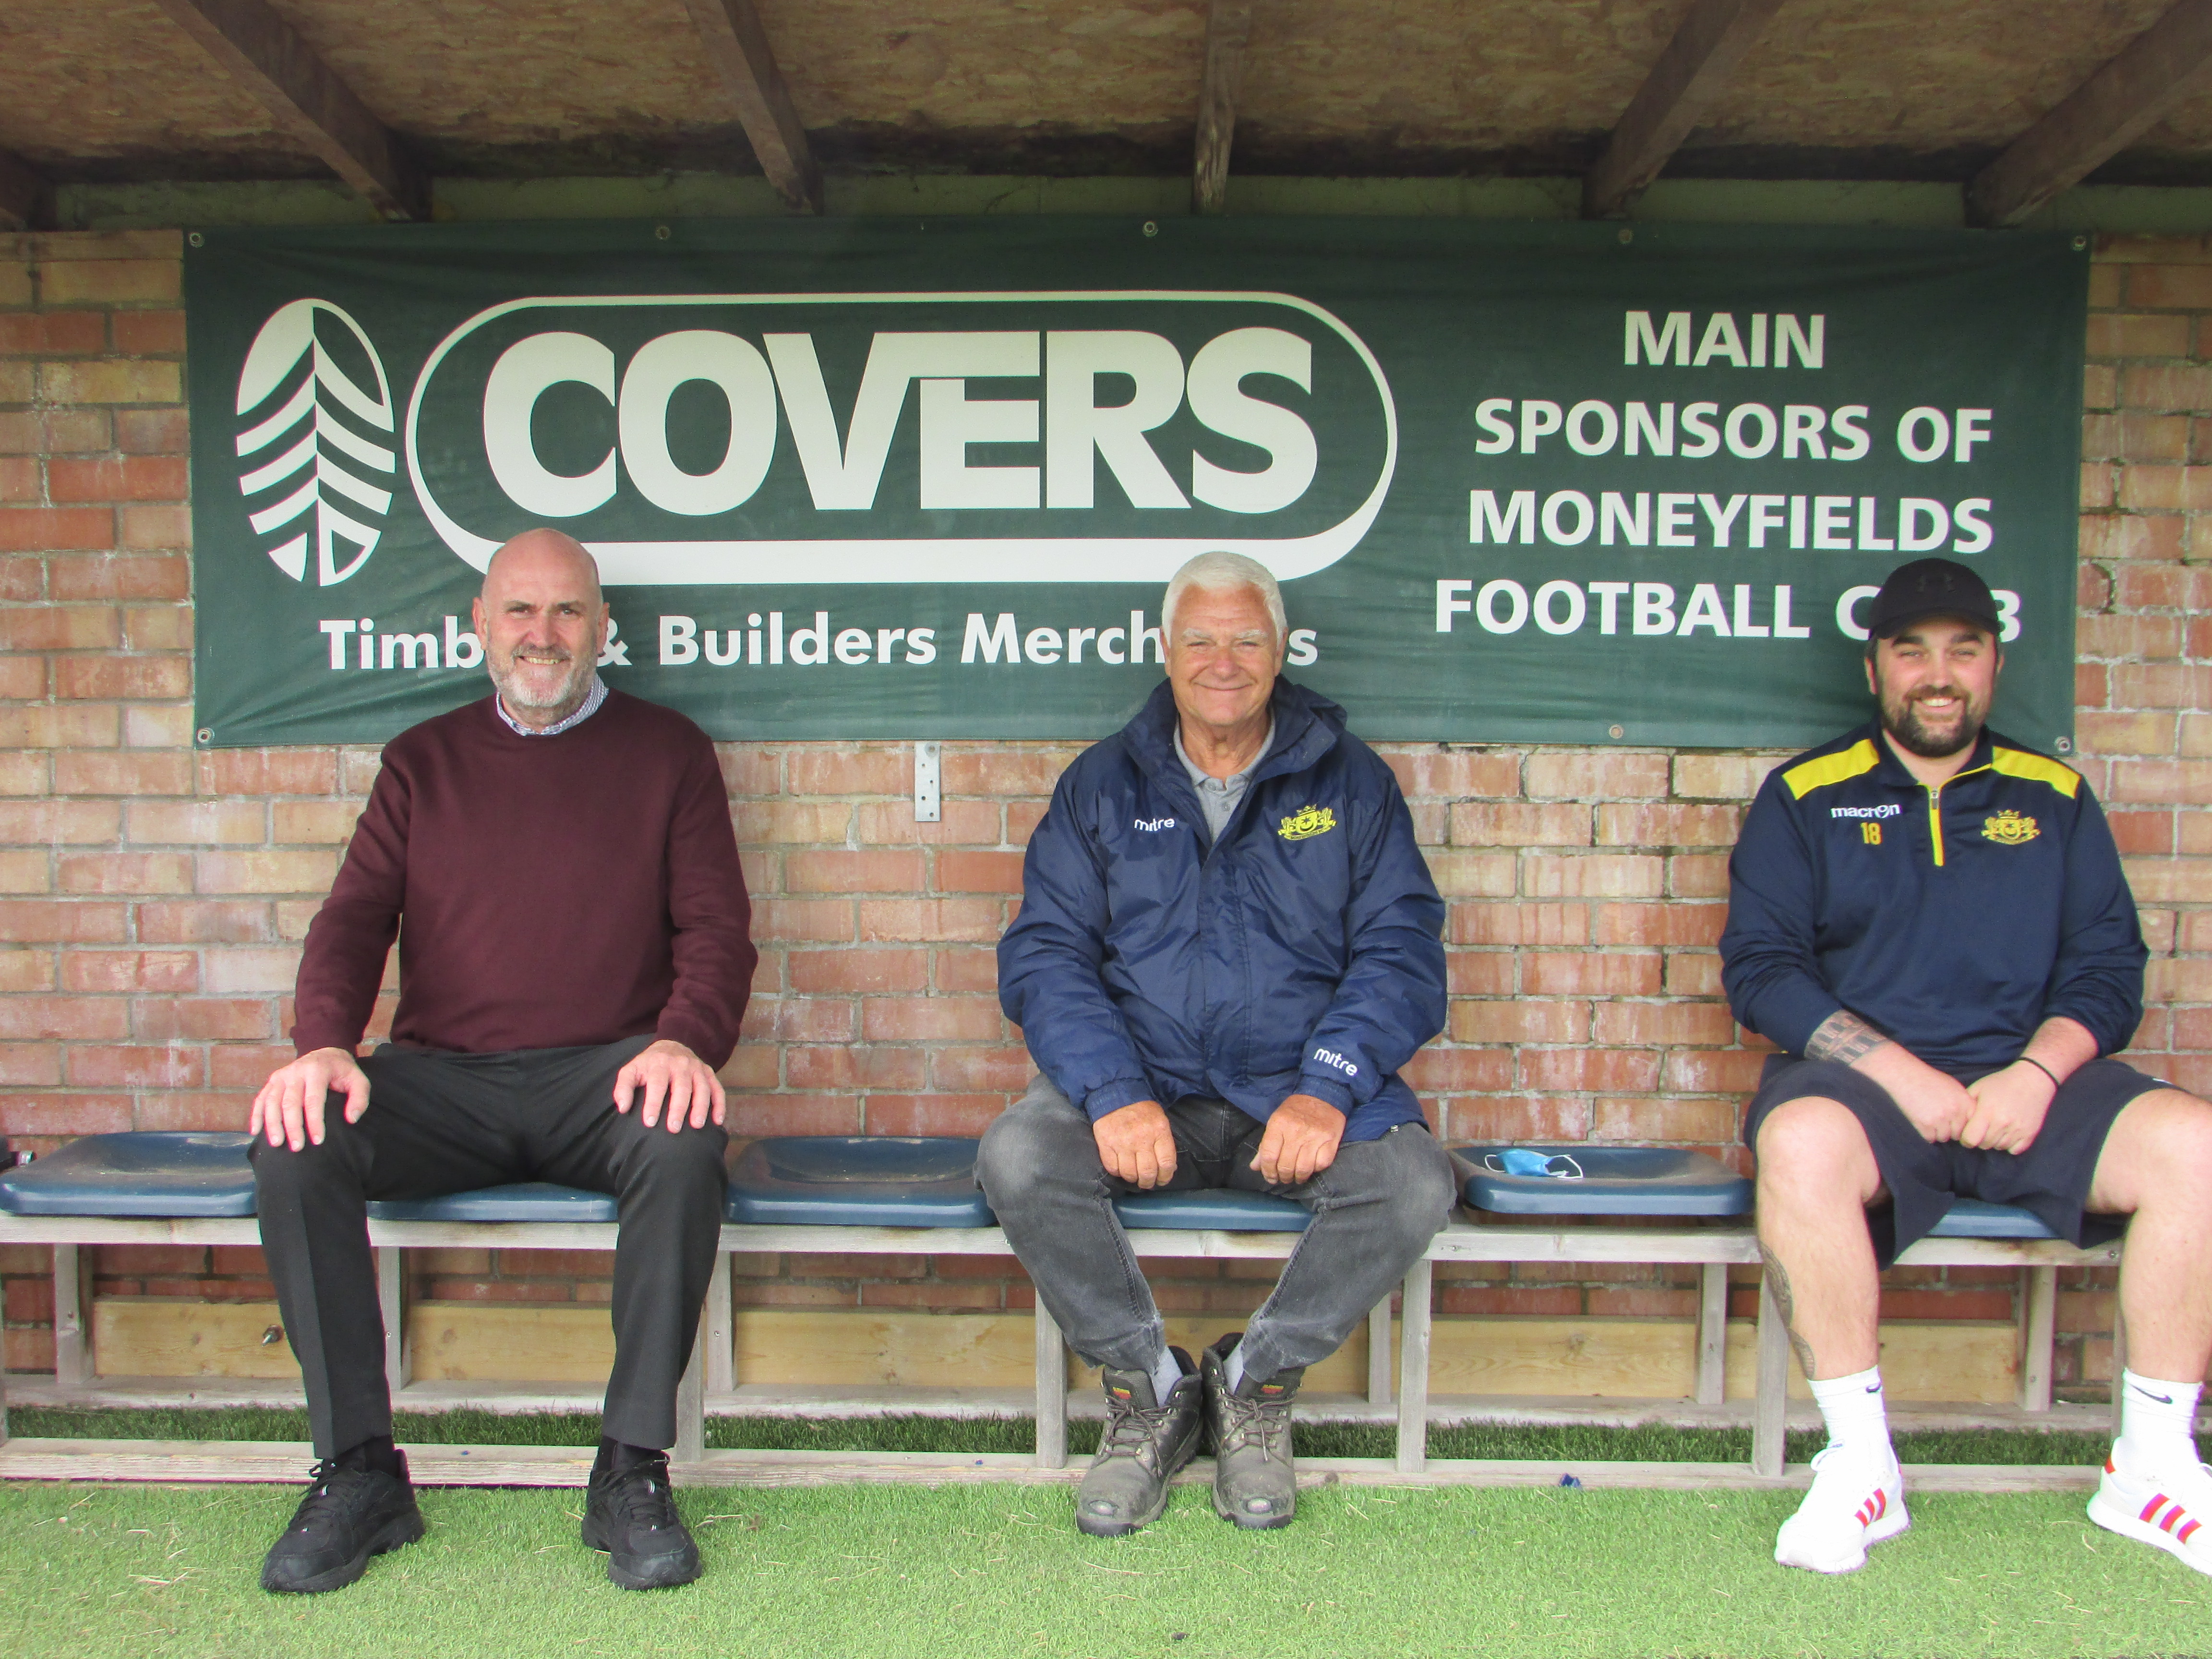 Covers Portsmouth to sponsor Moneyfields FC